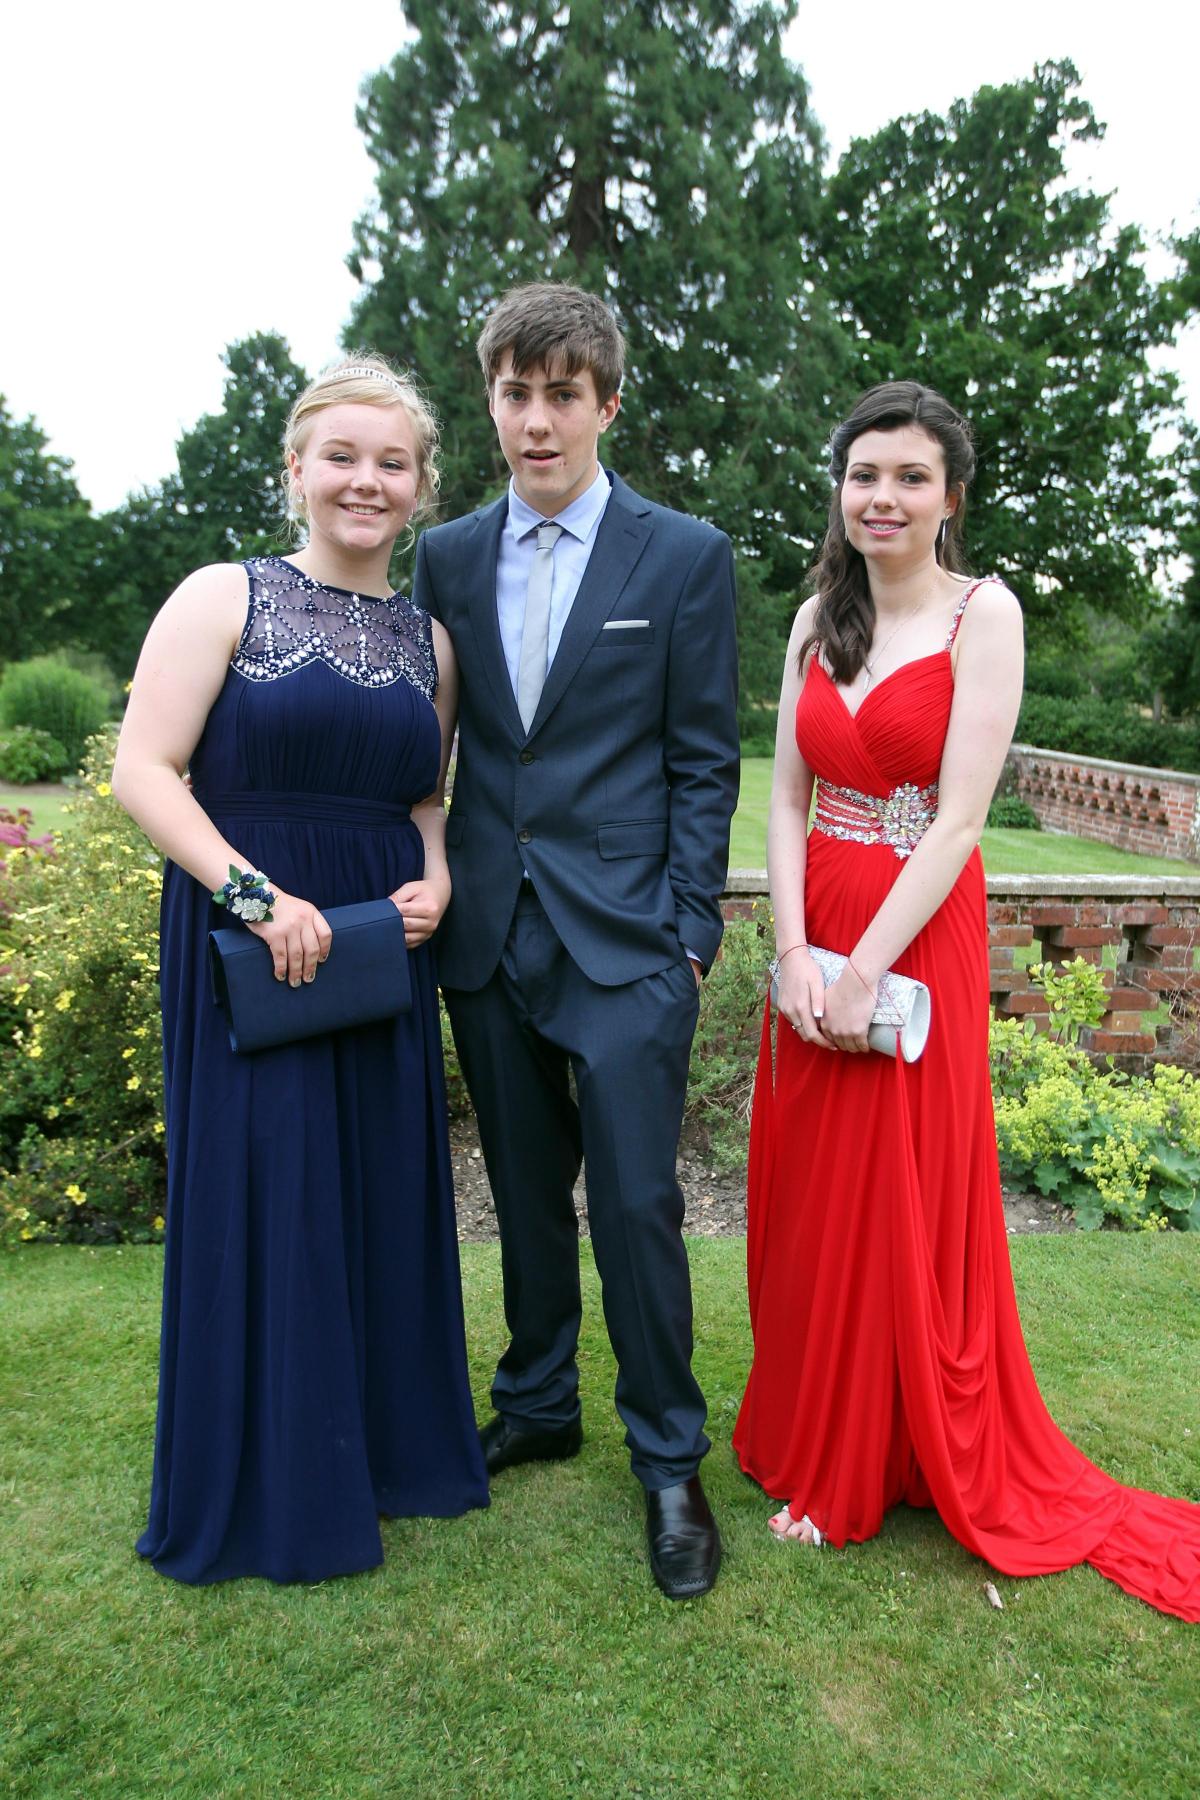 New Forest Academy prom